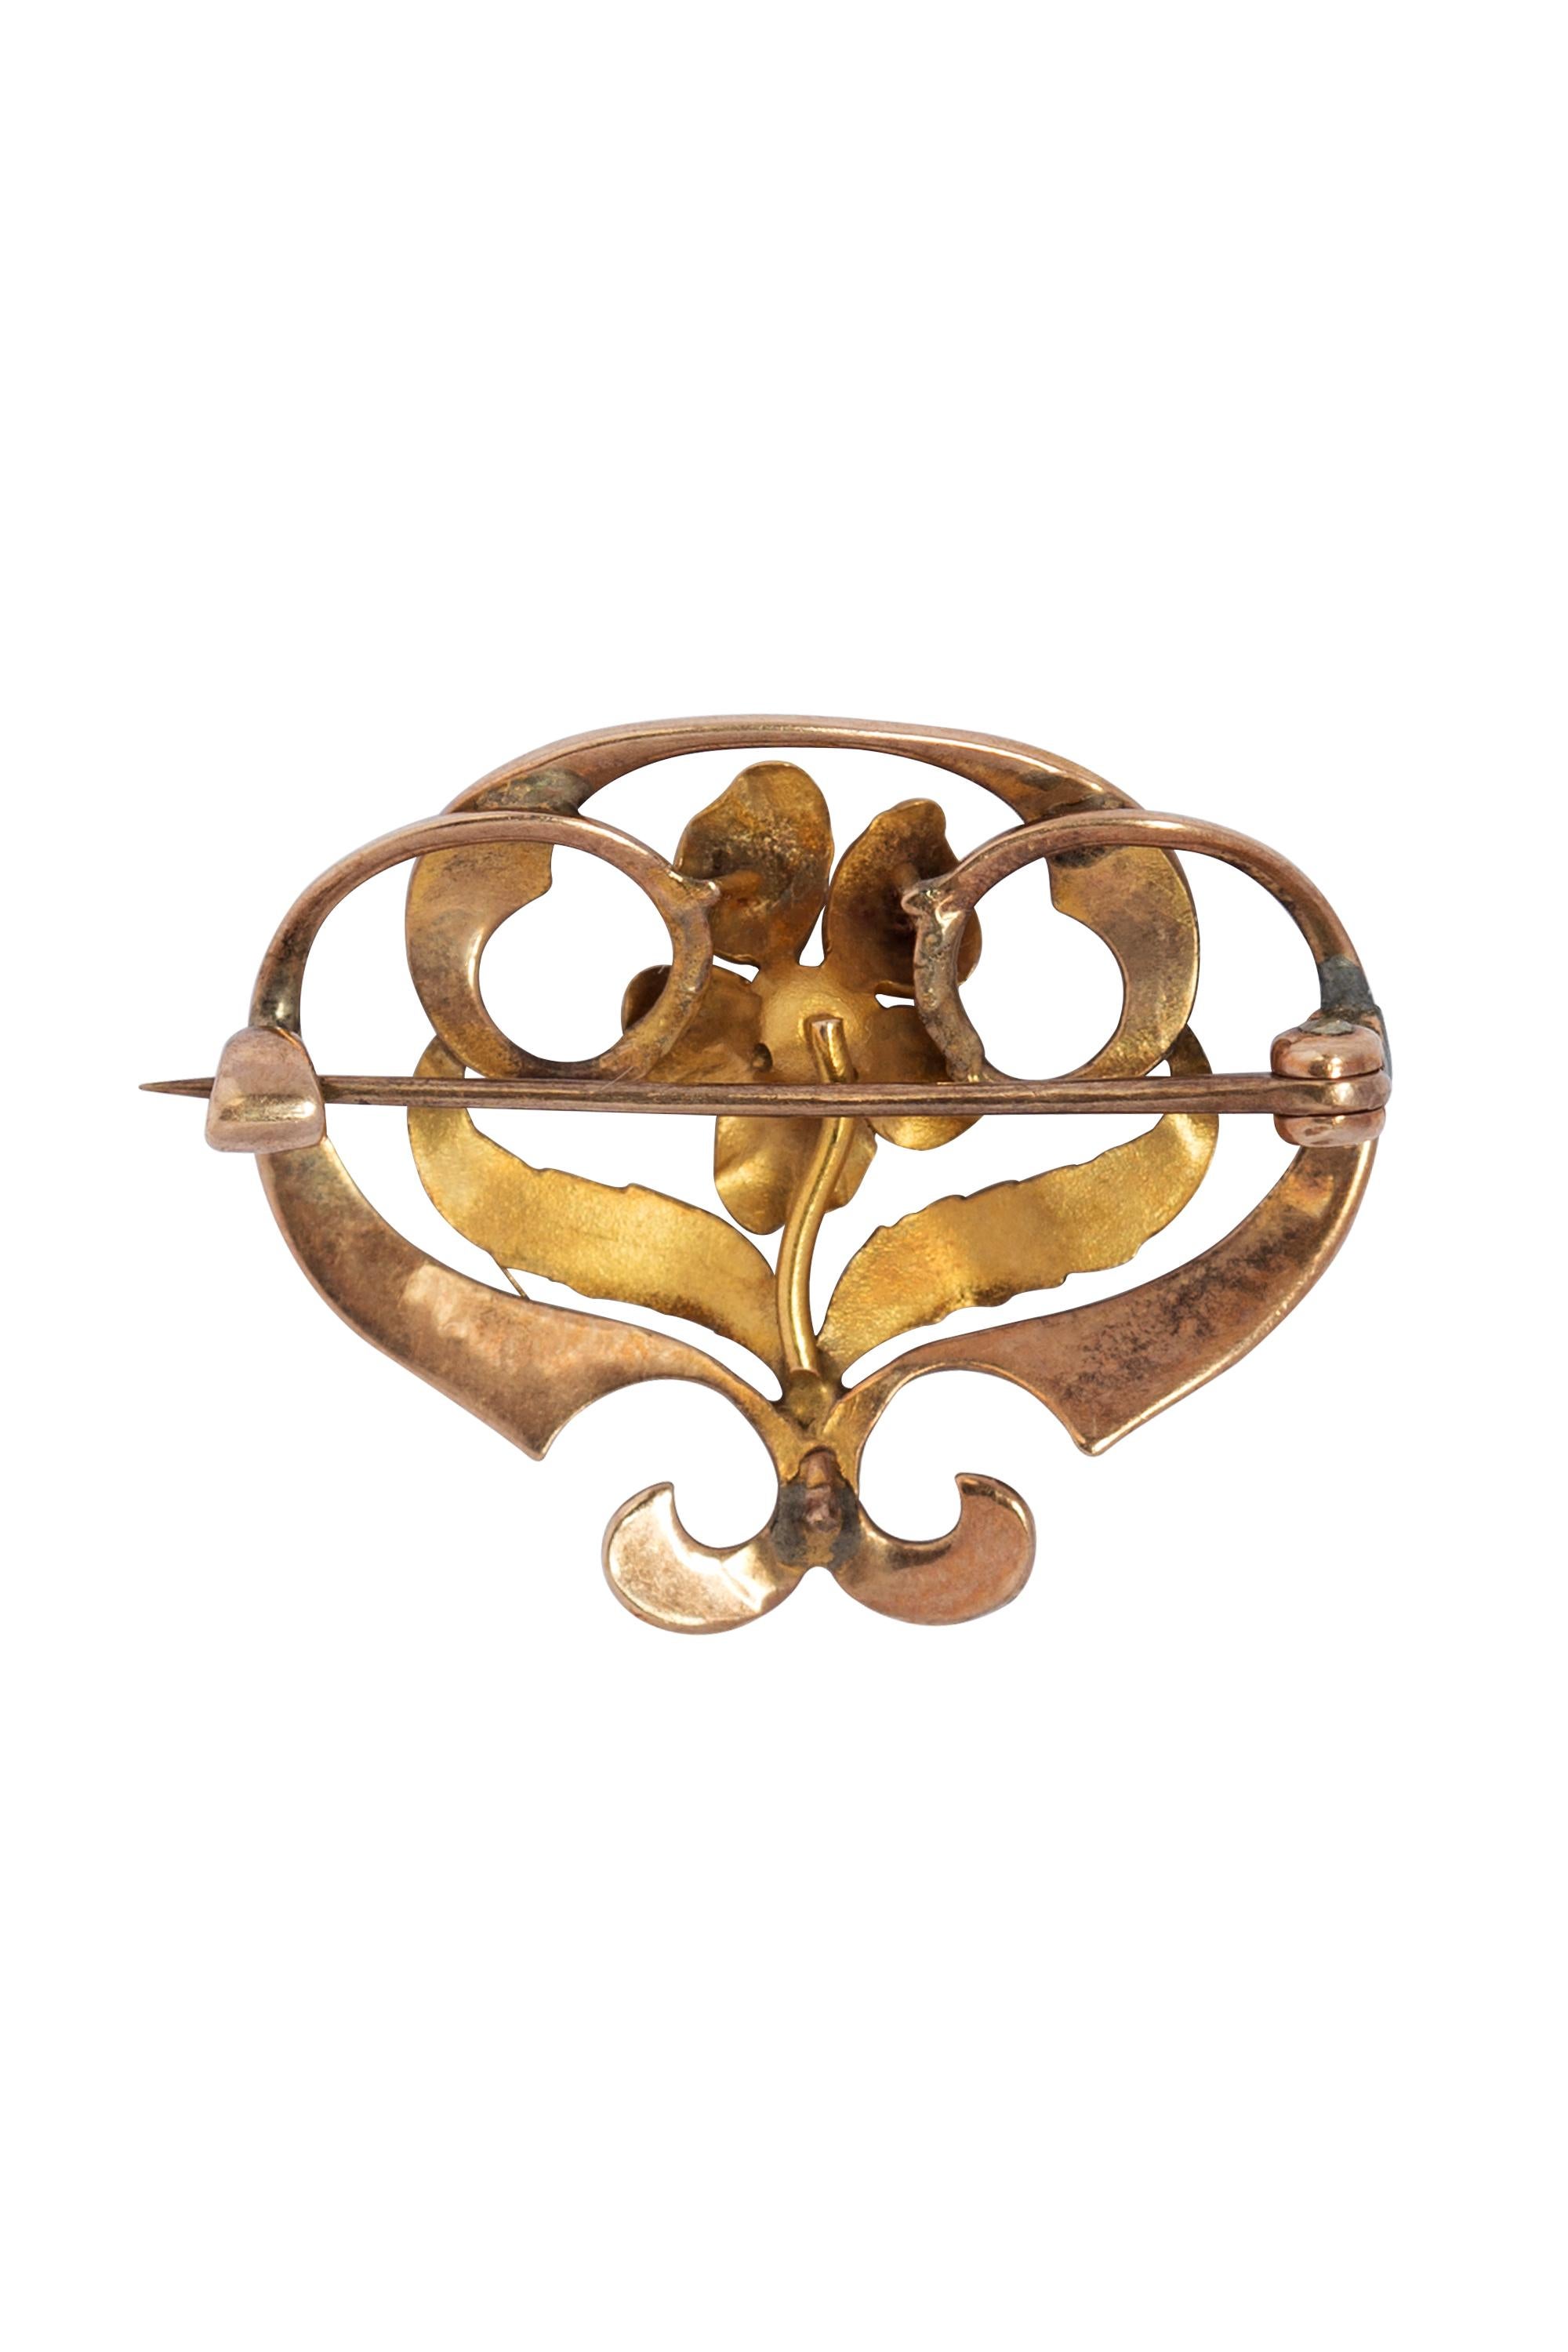 This exquisite Art Nouveau flower brooch pin is a true testament to the romantic and natural style of the era. Crafted in 14k yellow gold, the swirling frame and finely engraved leaves add a touch of elegance to the soft-petaled posey